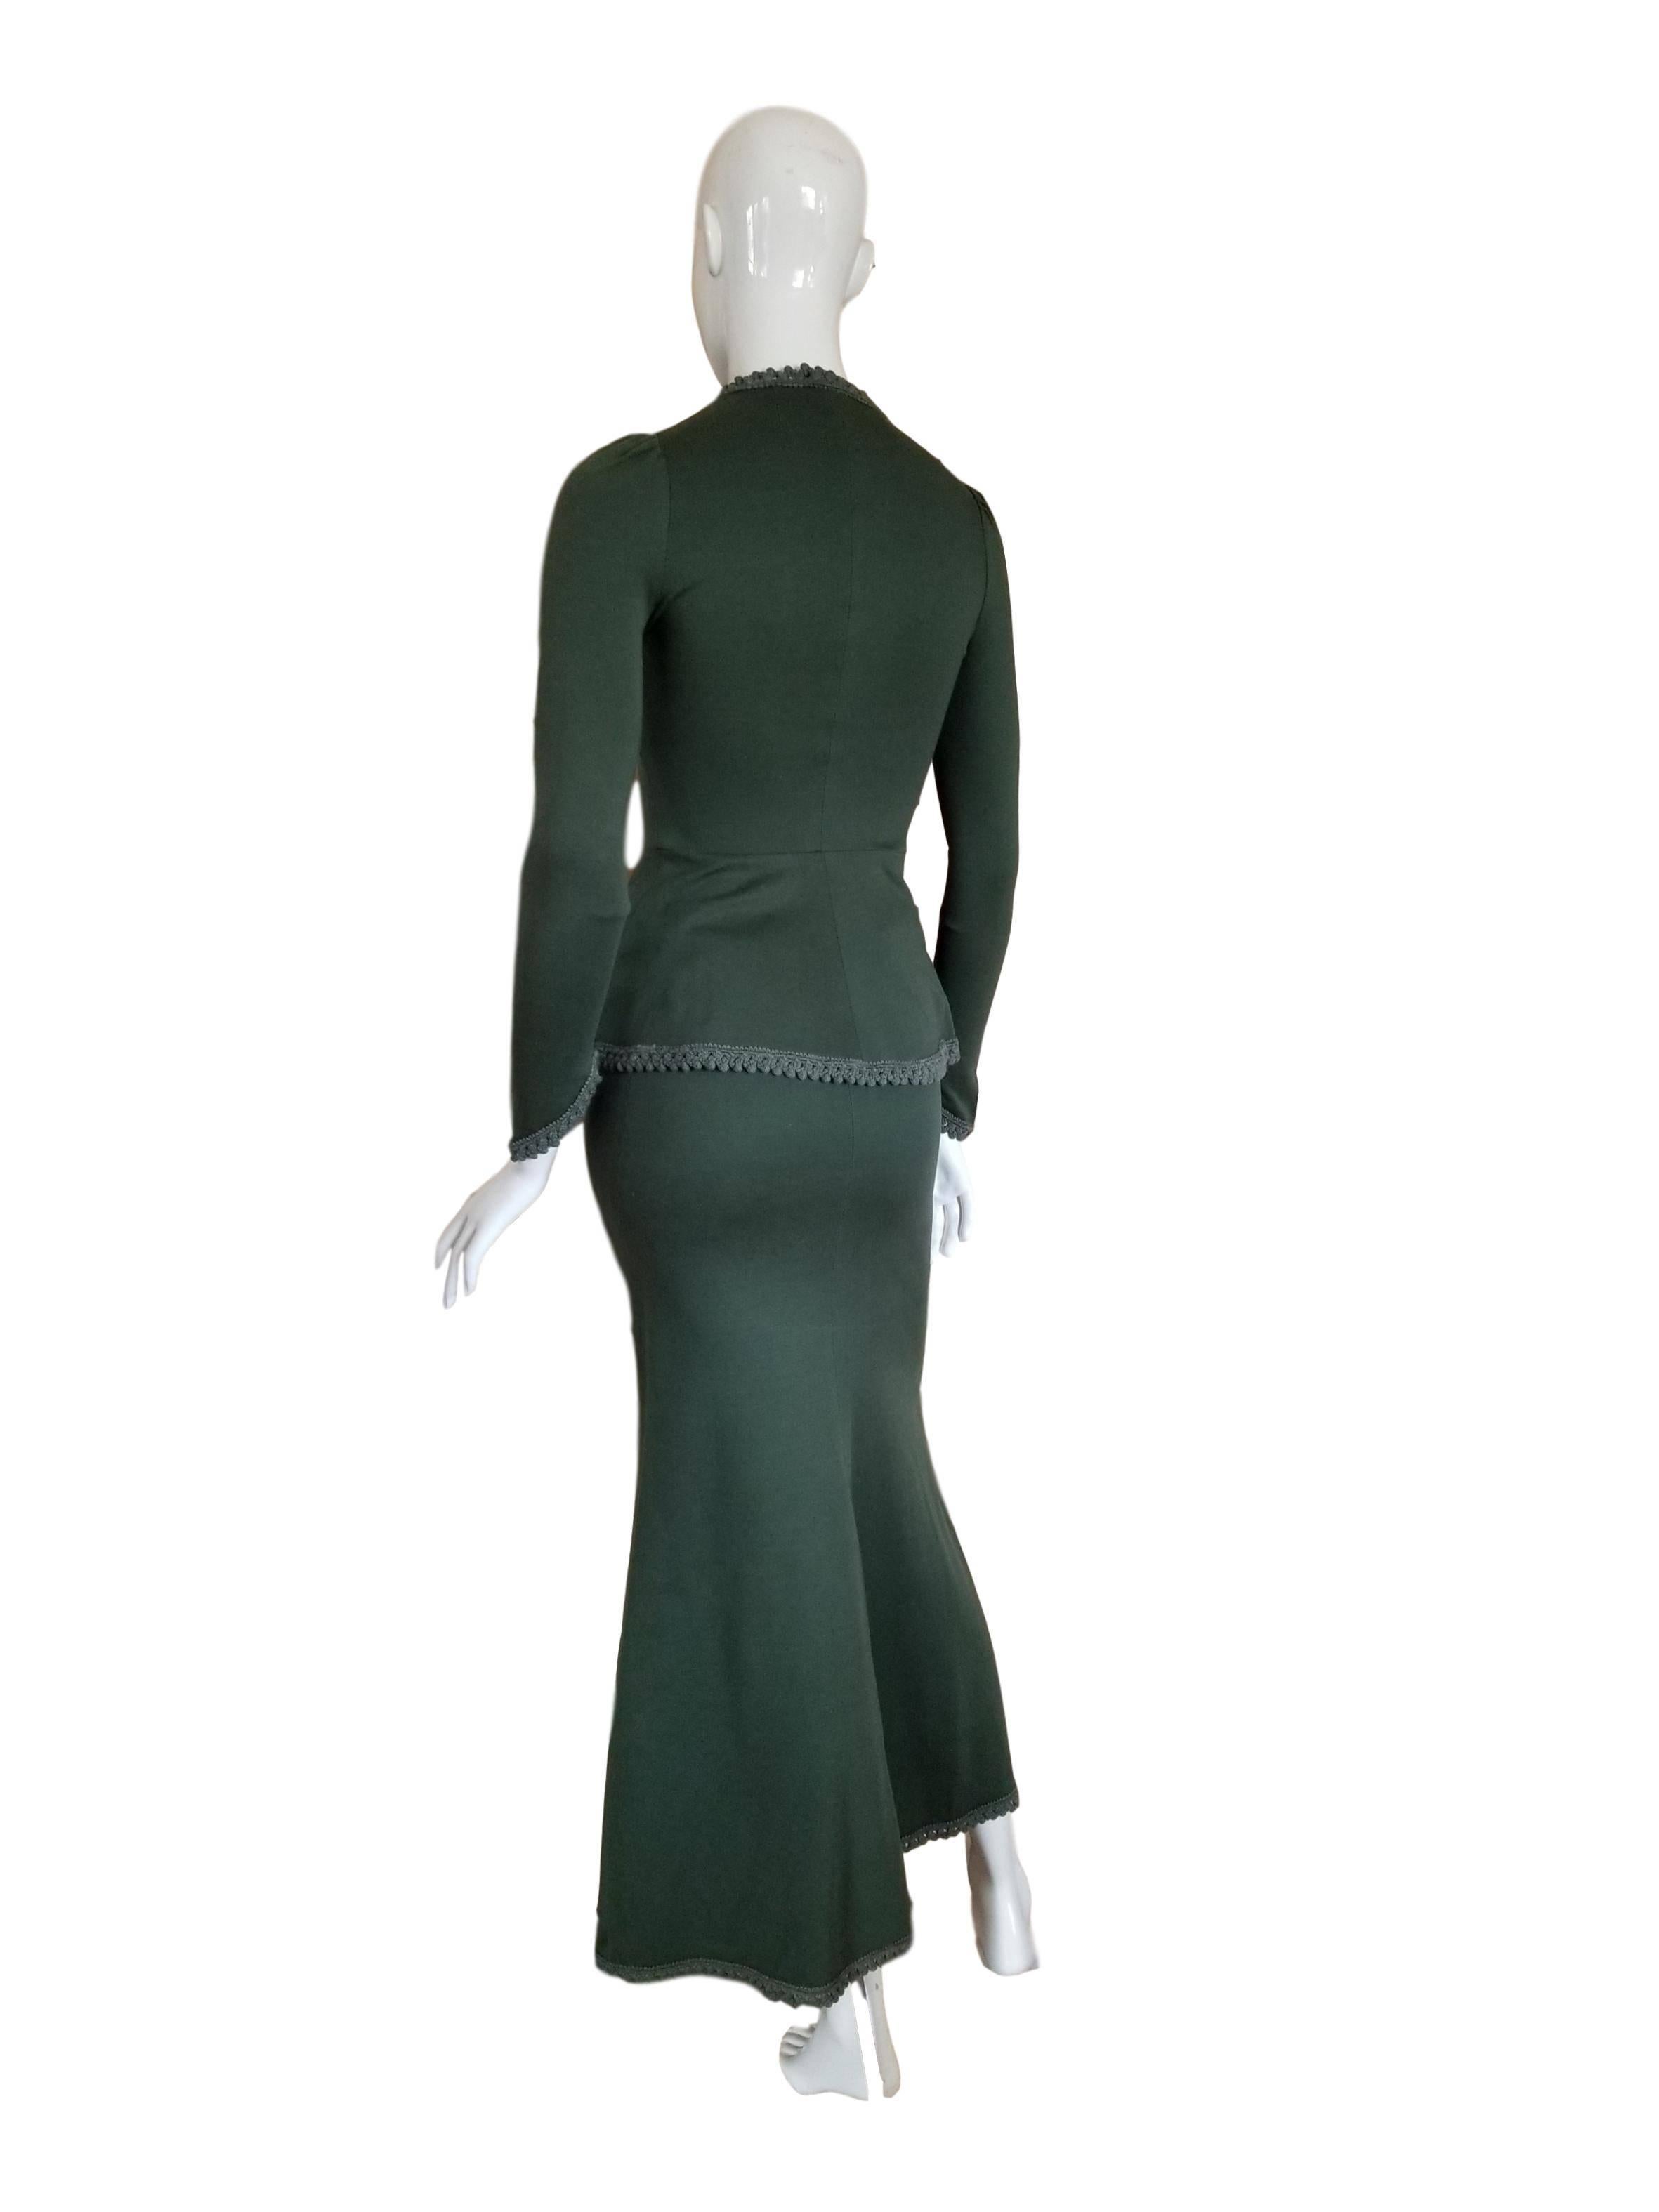 Late 1960s Edwardiana Biba cotton 2 piece in British Green. 
Skirt is midi length with elasticated waist band. Jacket is fitted on the bodice and sleeves. 

Excellent condition 

Size UK 6
Measures Jacket: 15 inches across chest, 12 inches across